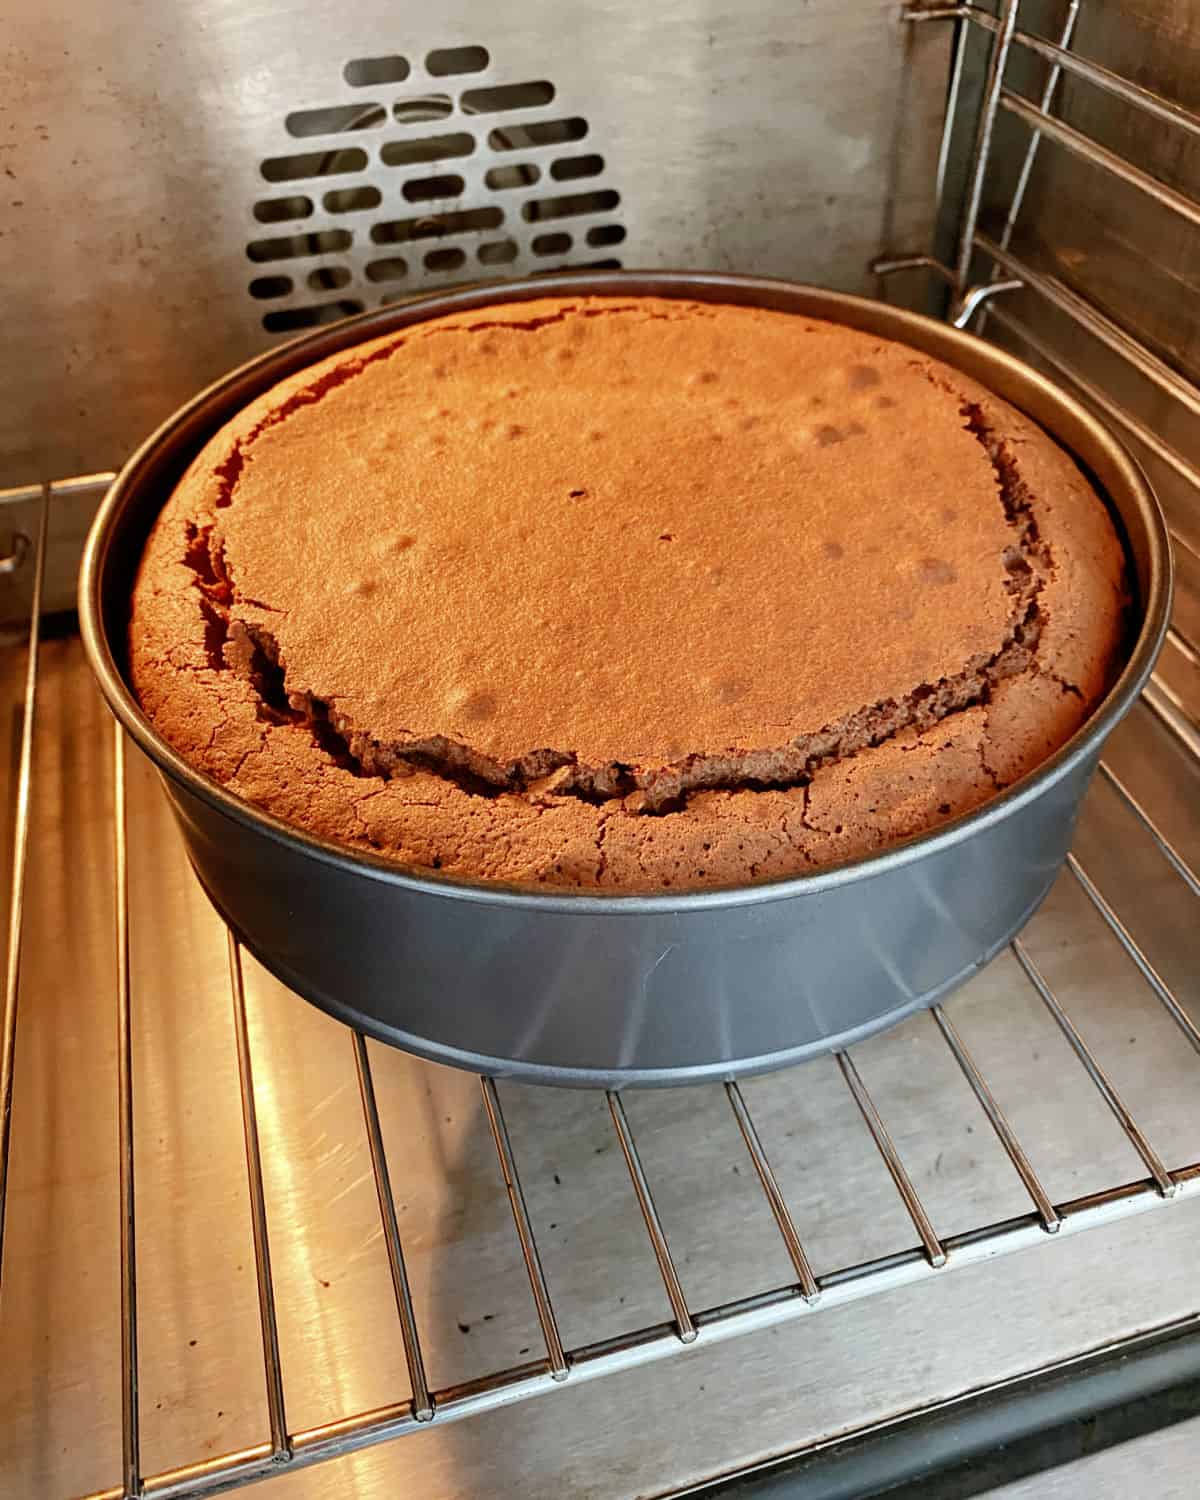 Inside view of chocolate cake being baked in the oven.